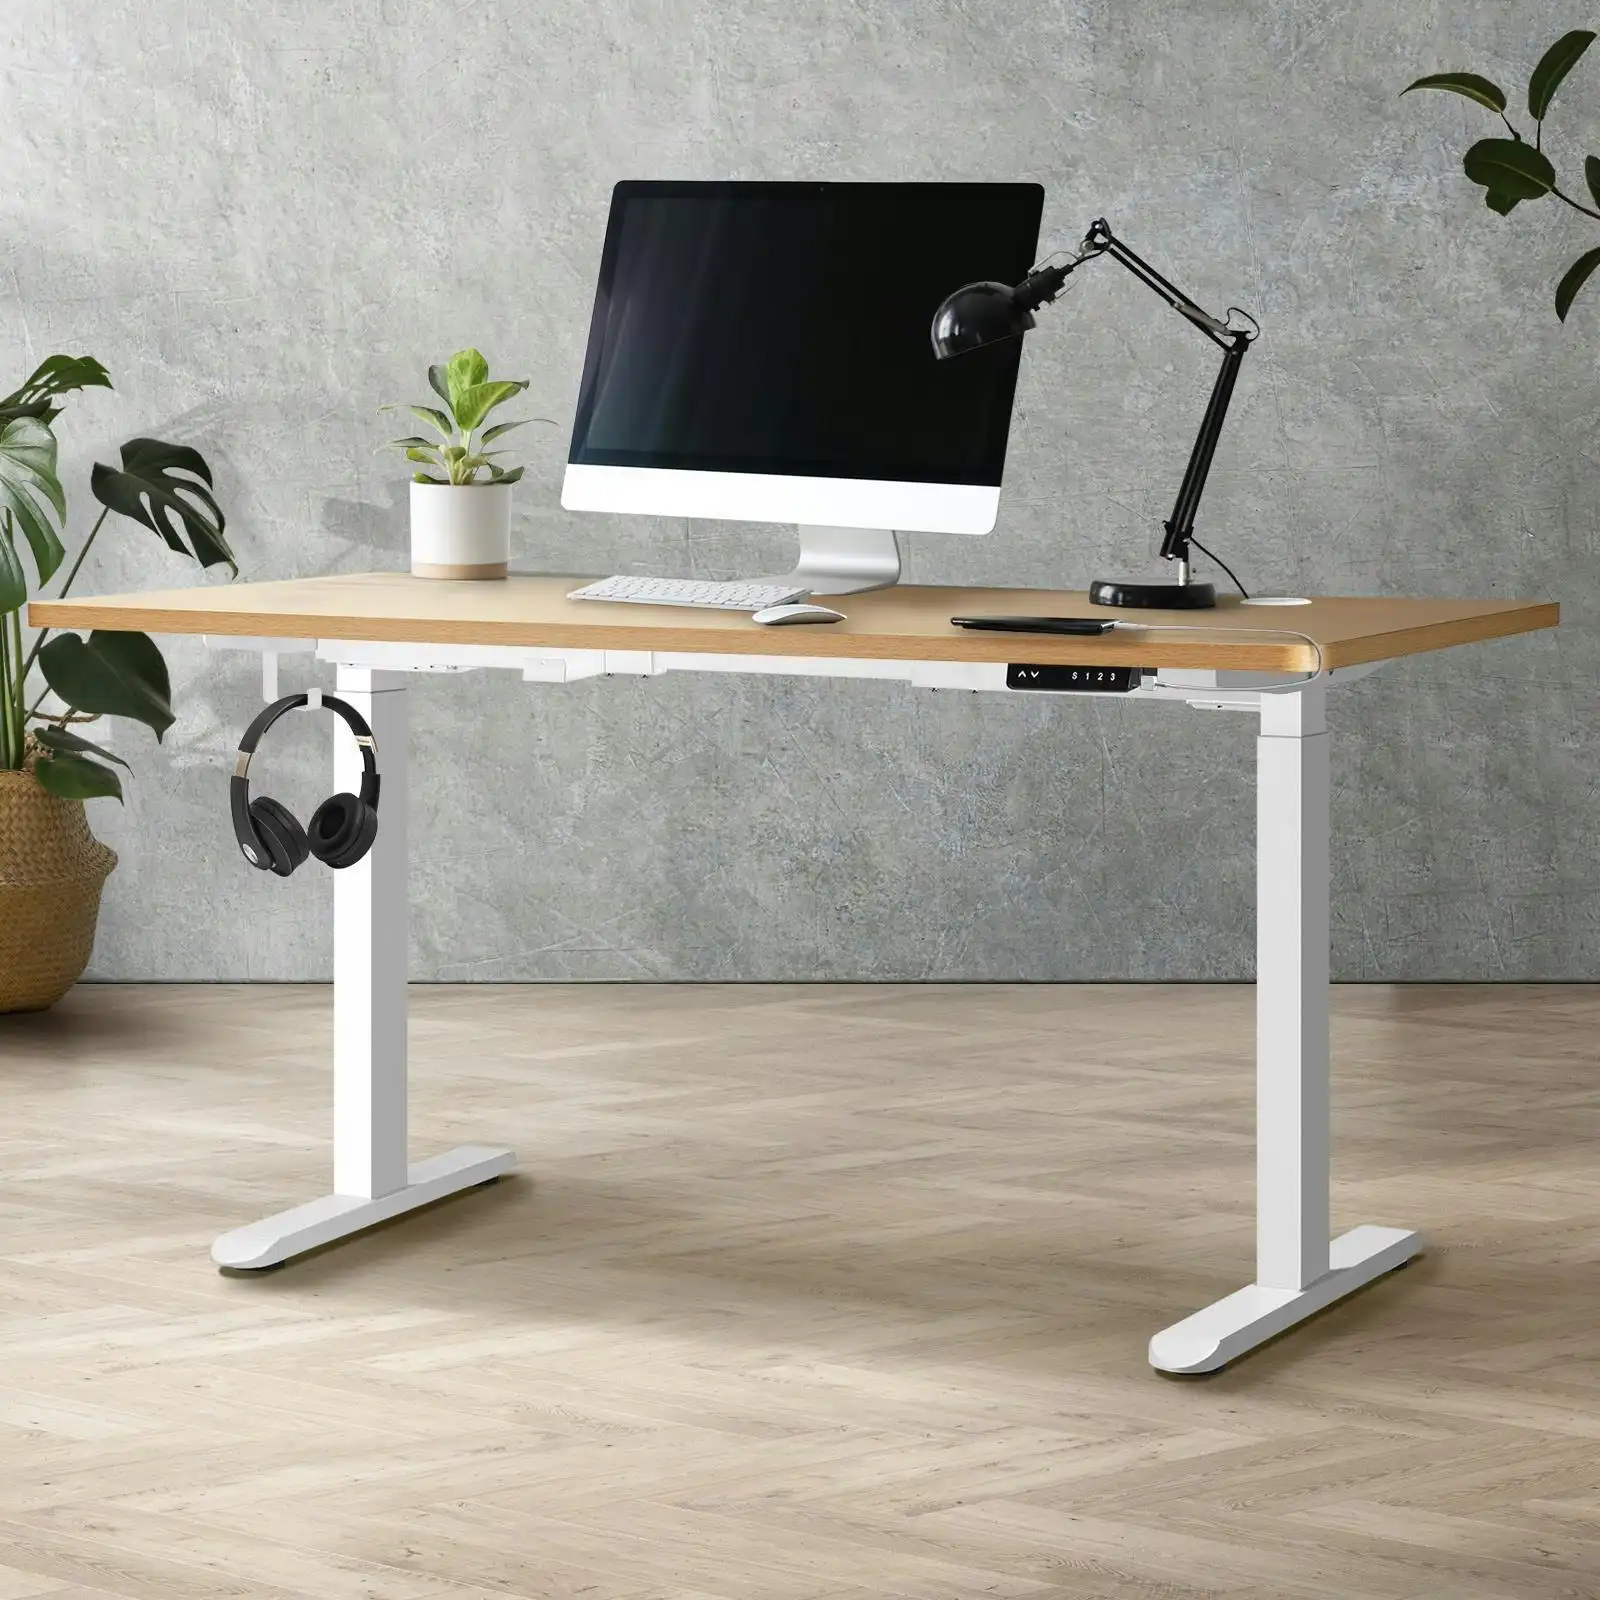 Oikiture 140cm Electric Standing Desk Dual Motor White Frame OAK Desktop With USB&Type C Port